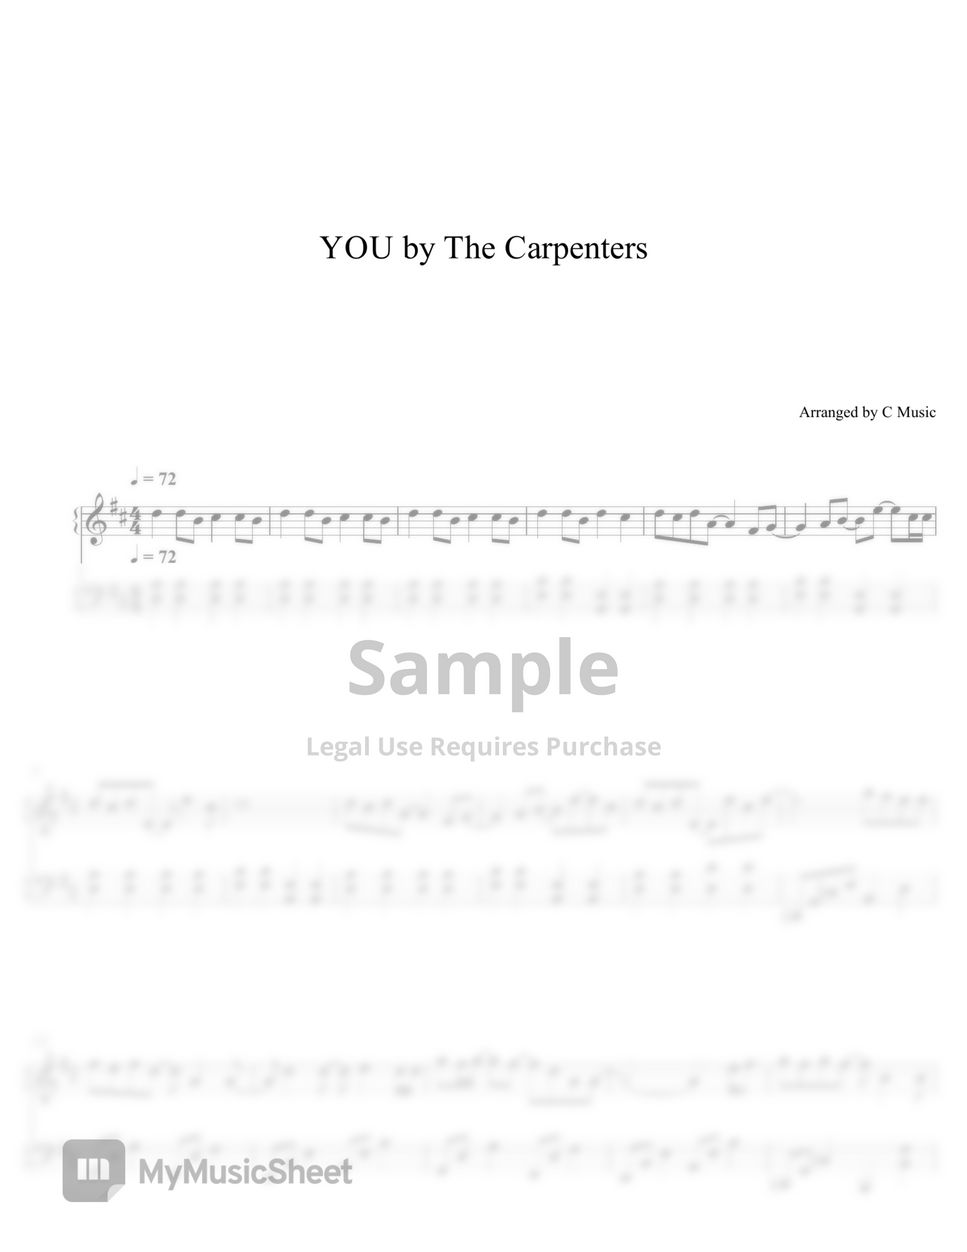 The Carpenters - YOU by C Music